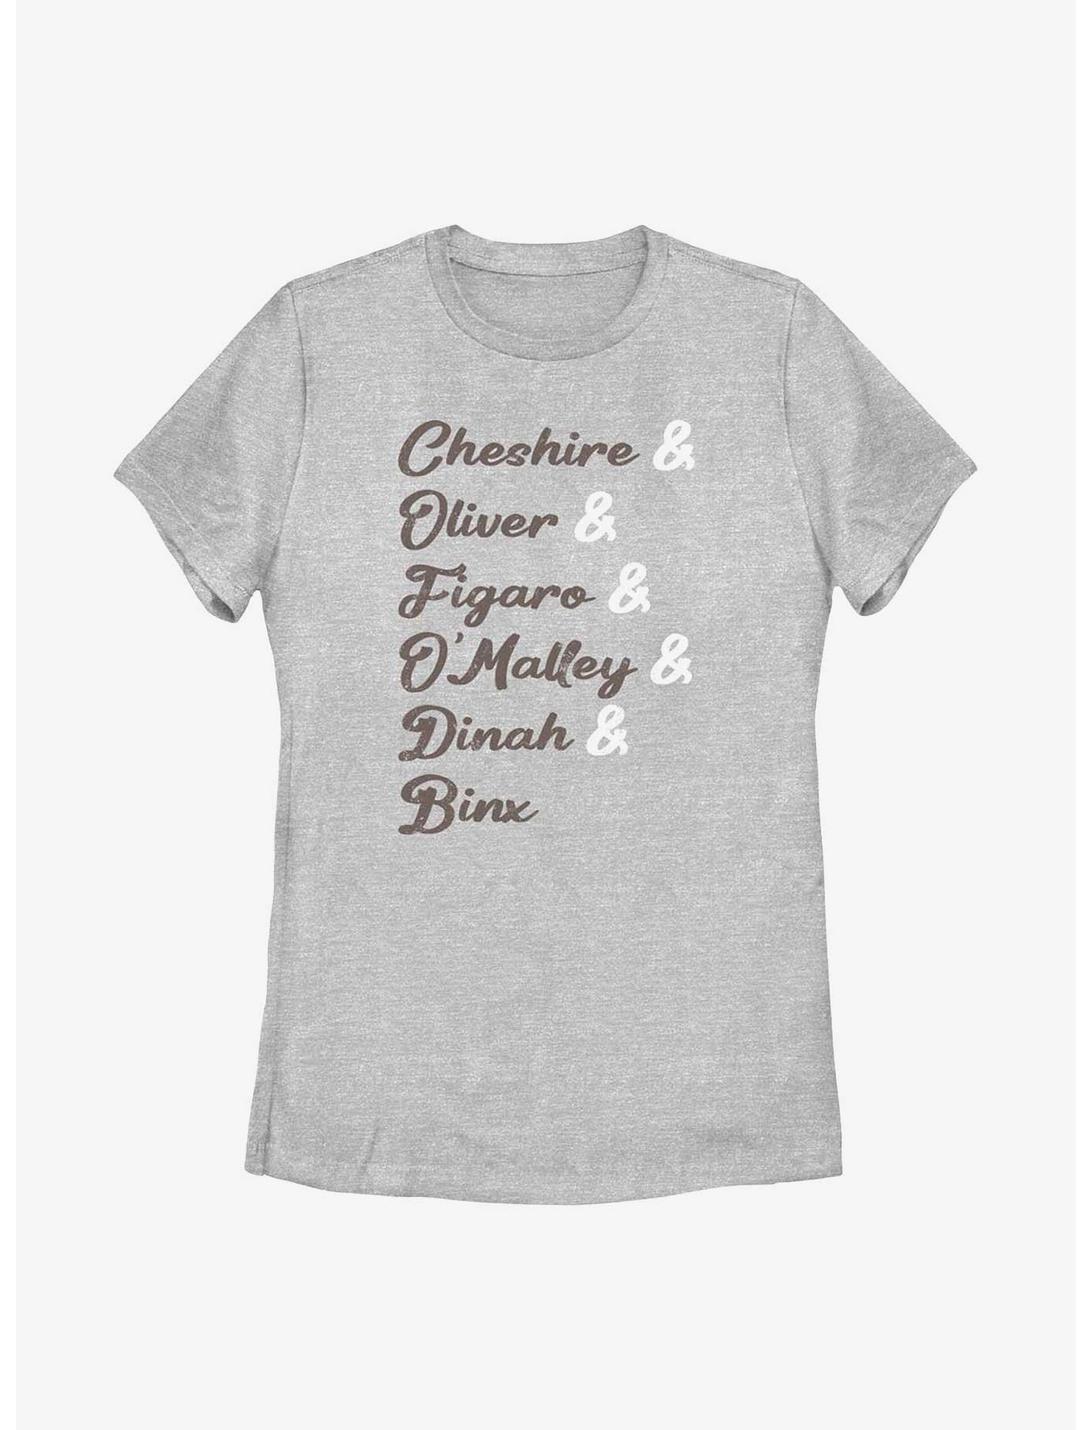 Disney Channel Cheshire, Oliver, Figaro, O'Malley, Dinah, Binx Womens T-Shirt, ATH HTR, hi-res